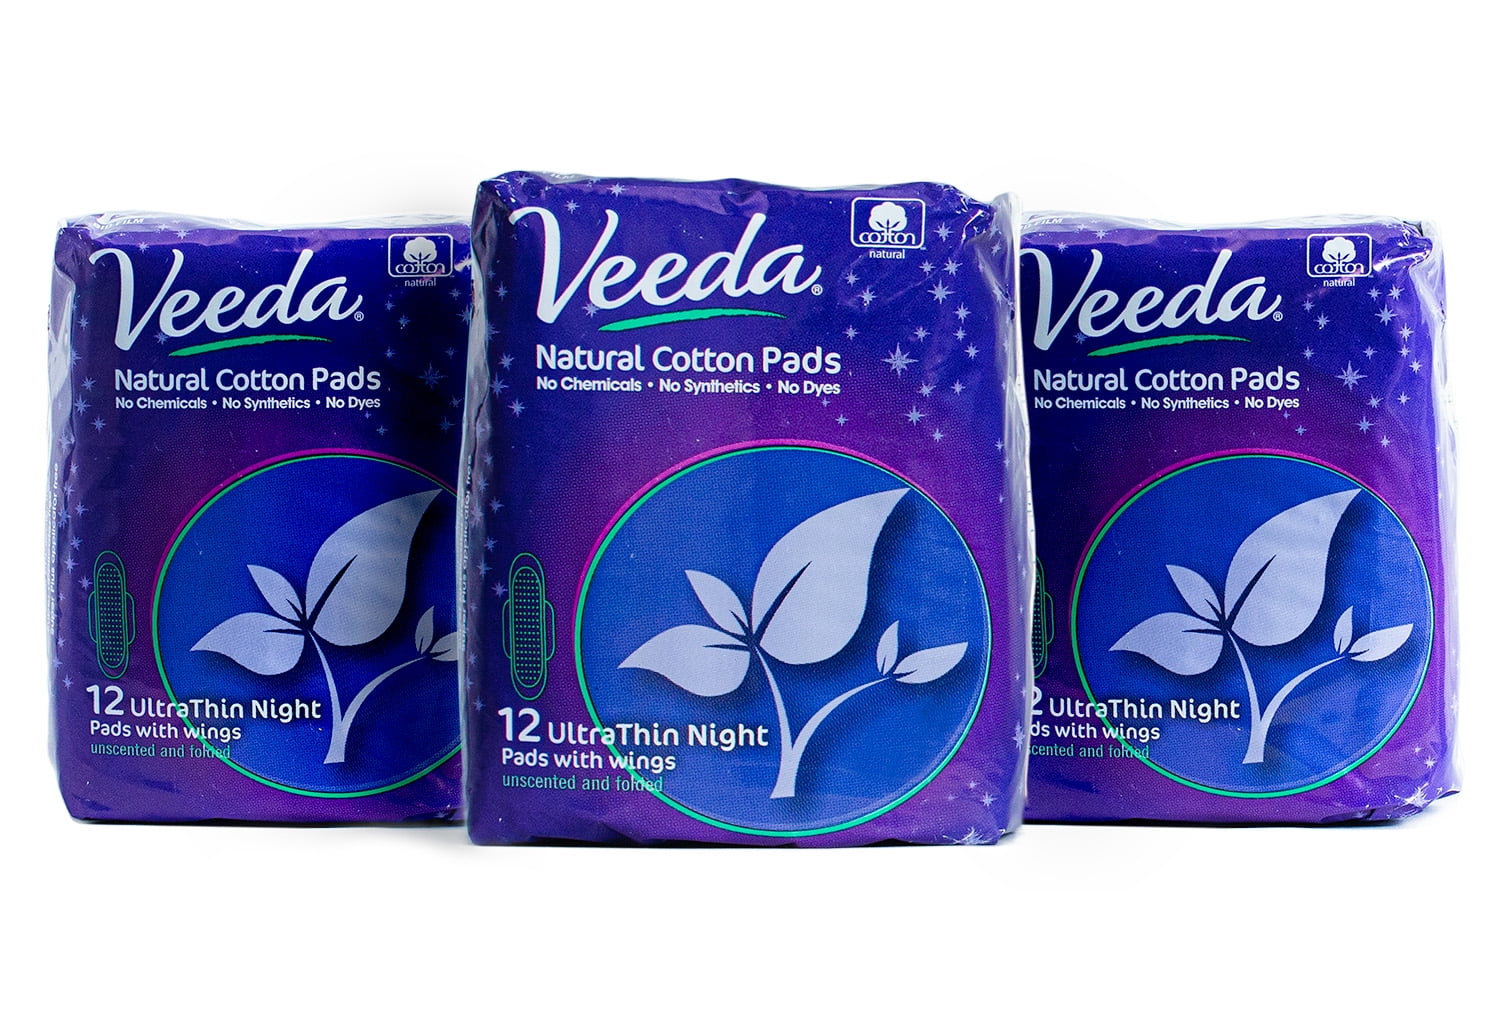 Veeda Ultra Thin Super Absorbent Night Pads are Always Chlorine Pesticide  Dye and Fragrance Free Natural Cotton Sanitary Napkins, 3 Packs of 12 Count  Each 